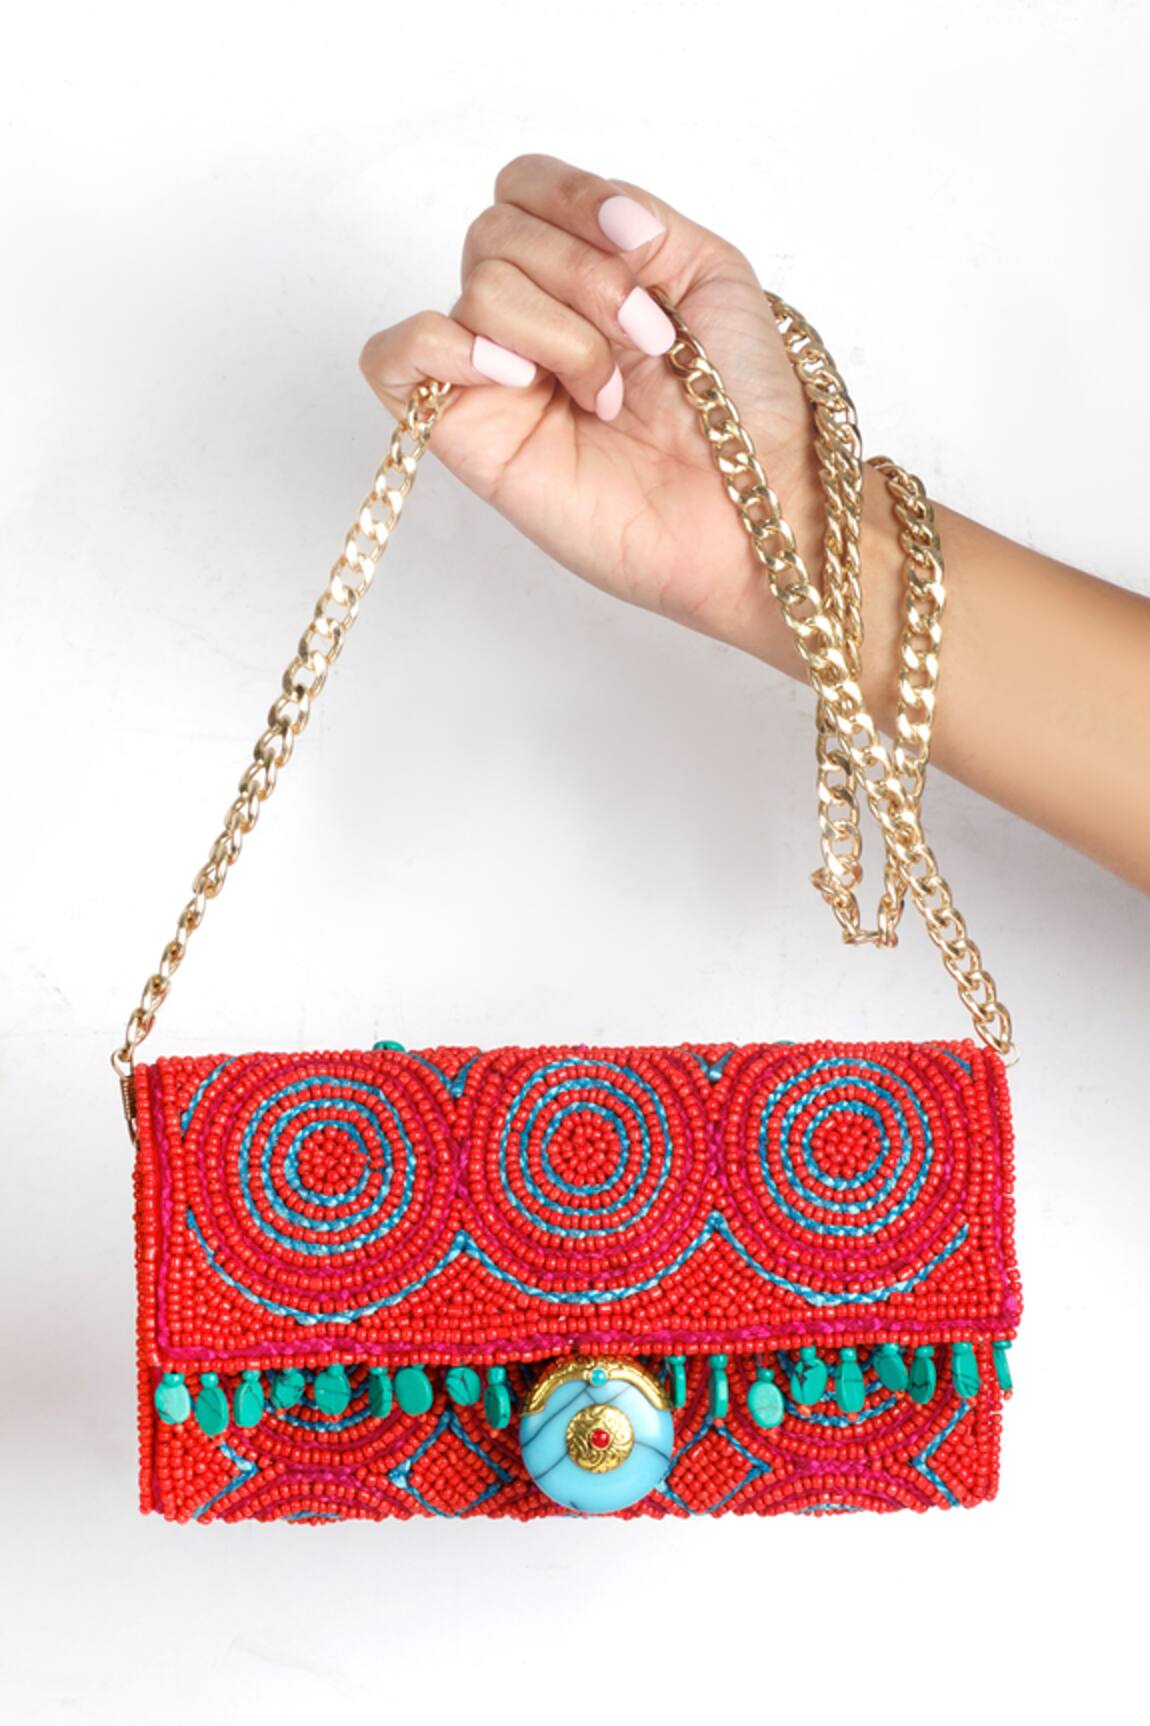 Sole House Embroidered Flap Sling Bag